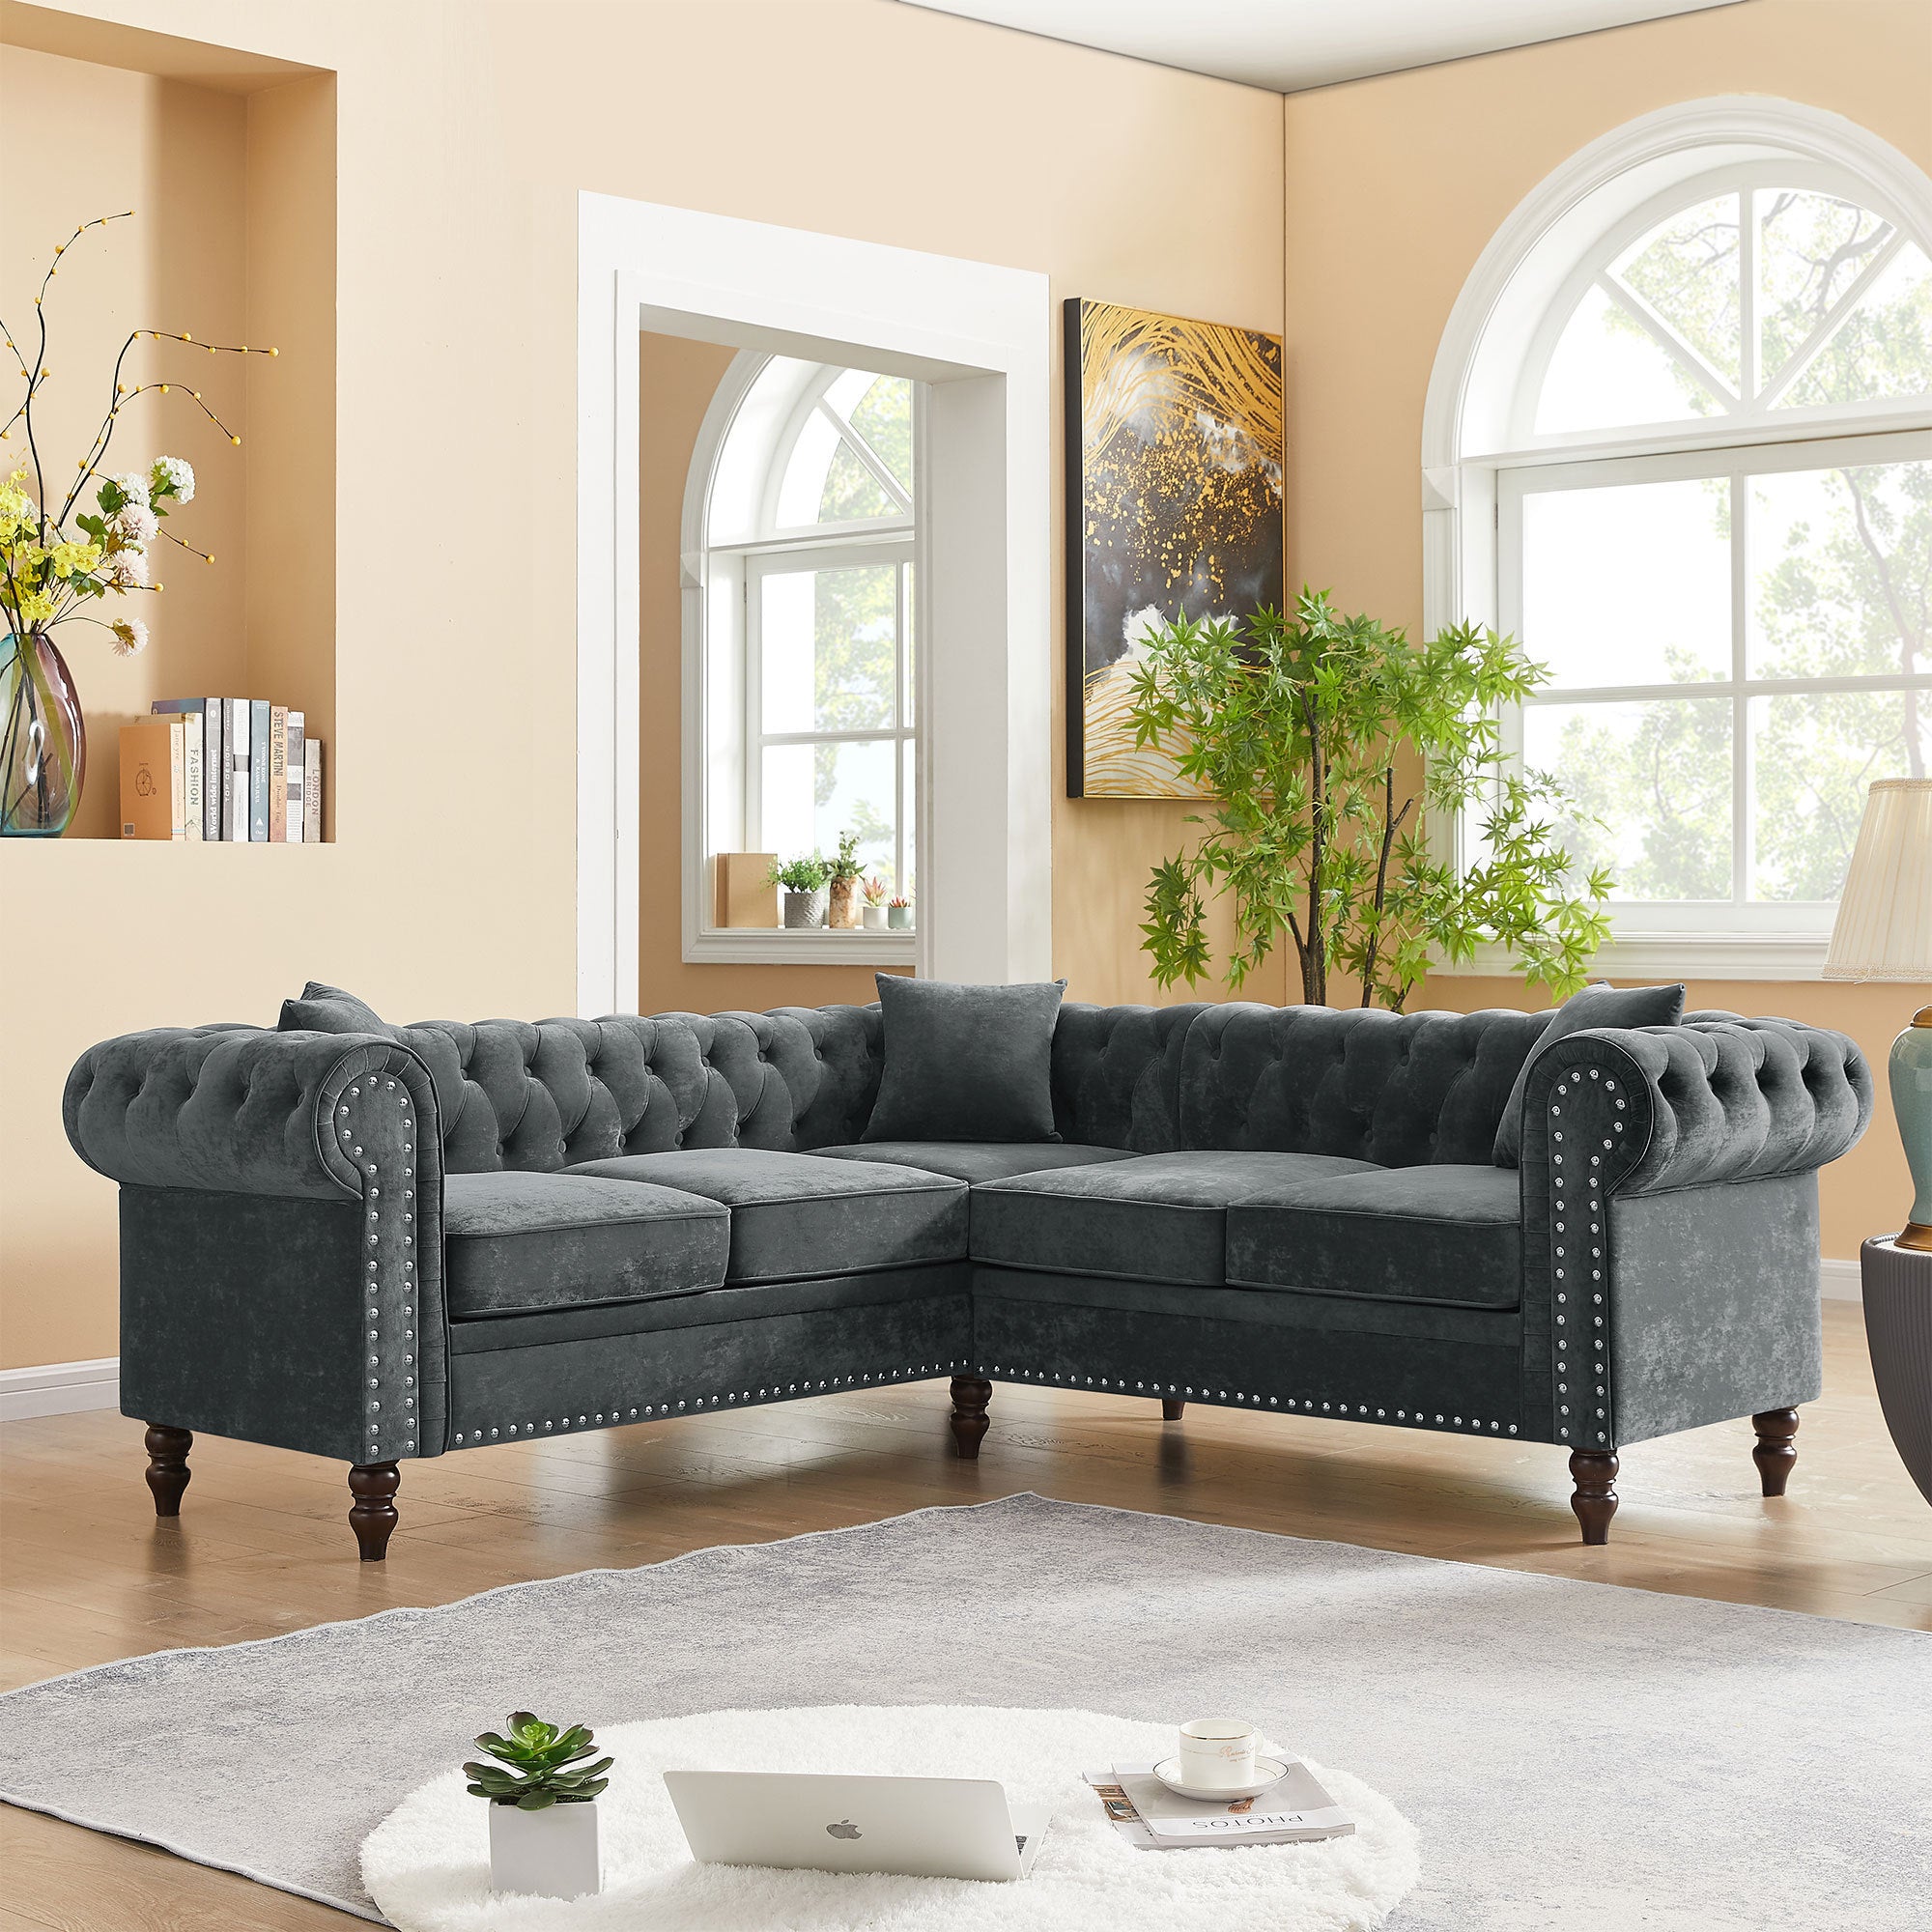 80" Deep Button Tufted Upholstered Roll Arm Luxury Classic Chesterfield L-Shaped Sectional Sofa | 3 Pillows Included | Solid Wood Gourd Legs | Grey Velvet | Elegant Addition to Your Living Space